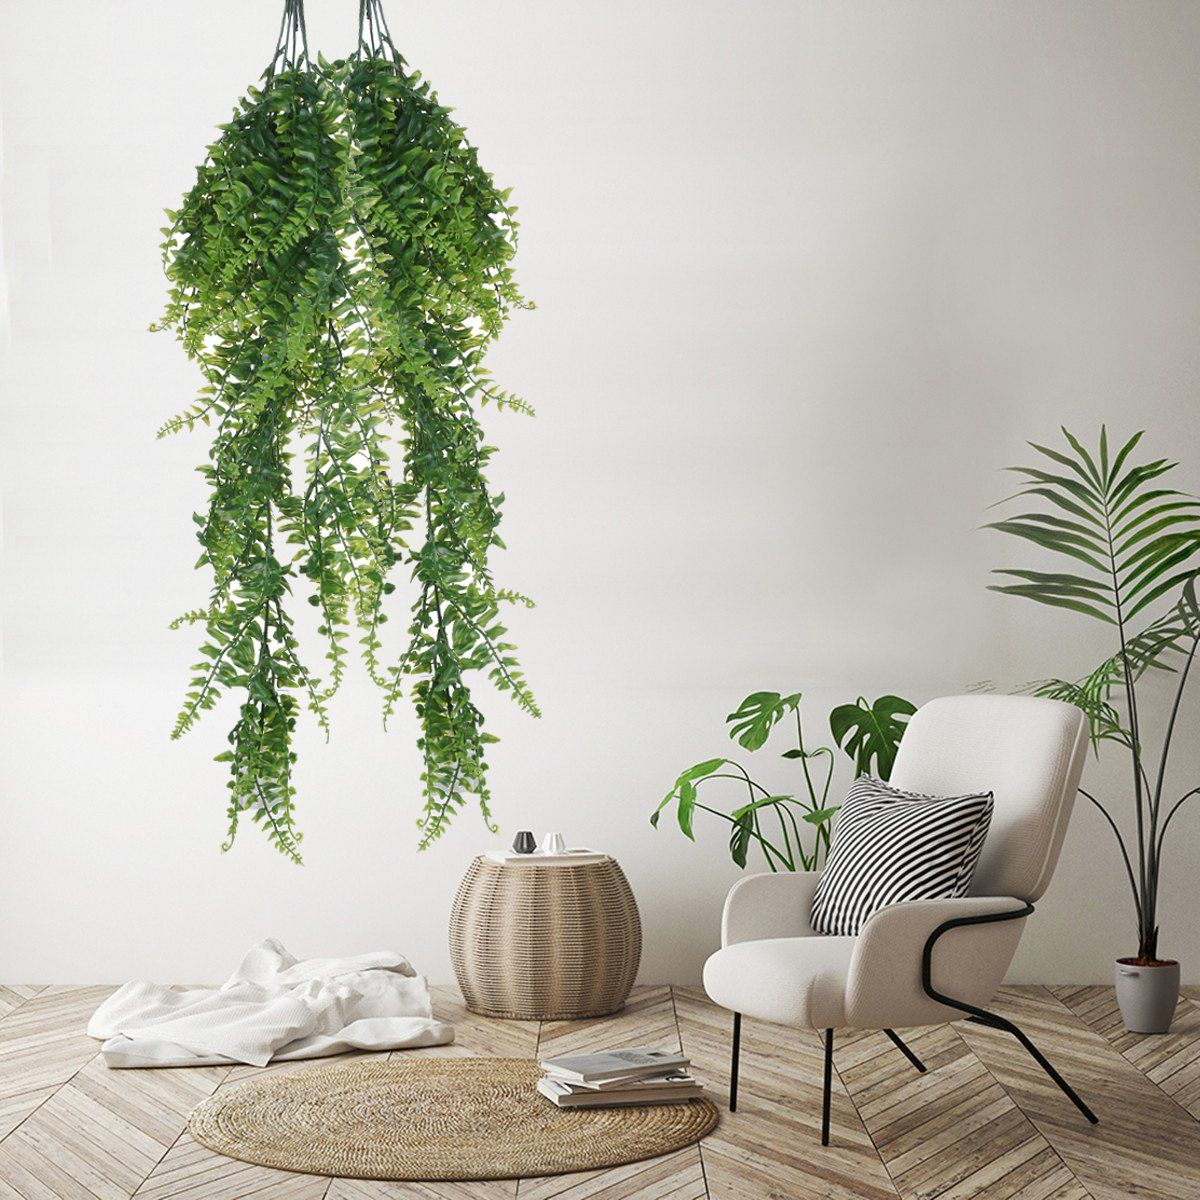 Plastic-Artificial-Green-Vines-Plant-Home-Garden-Decorations-Wall-Hanging-Novelty-1480694